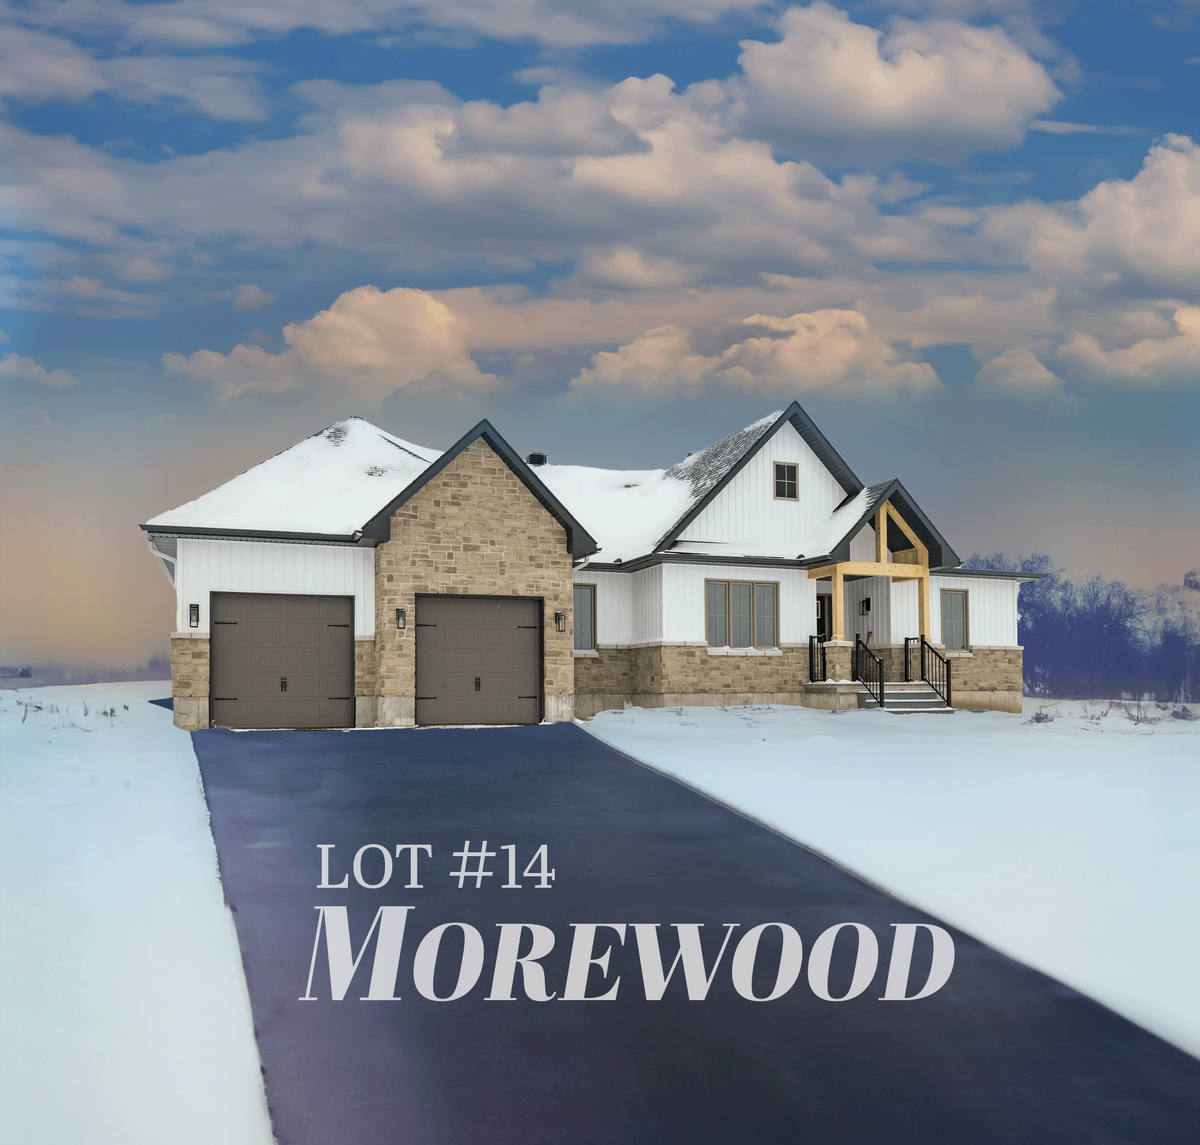 Let’s take a tour of the move-in ready Morewood Model at Lot RR14